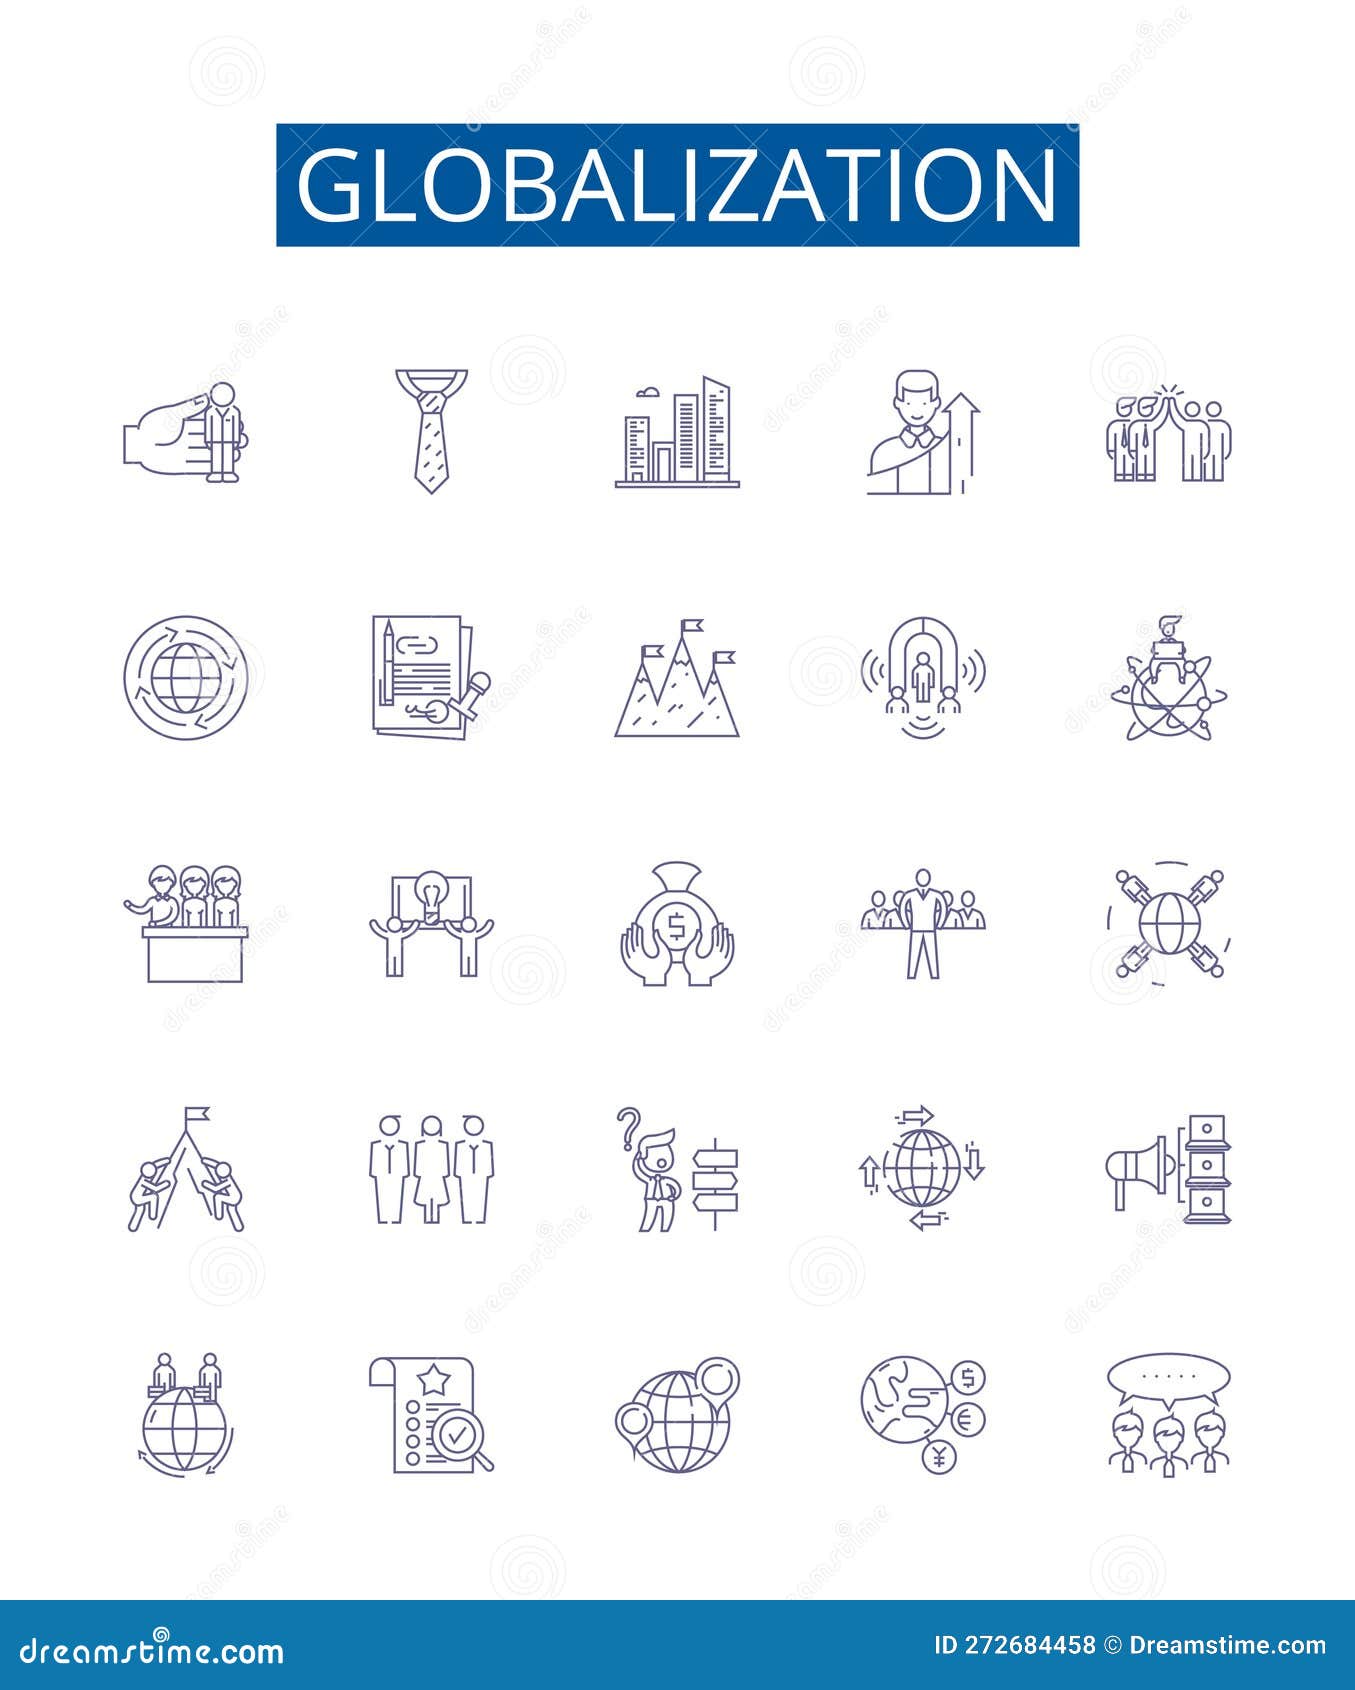 globalization line icons signs set.  collection of internationalization, integration, liberalization, convergence